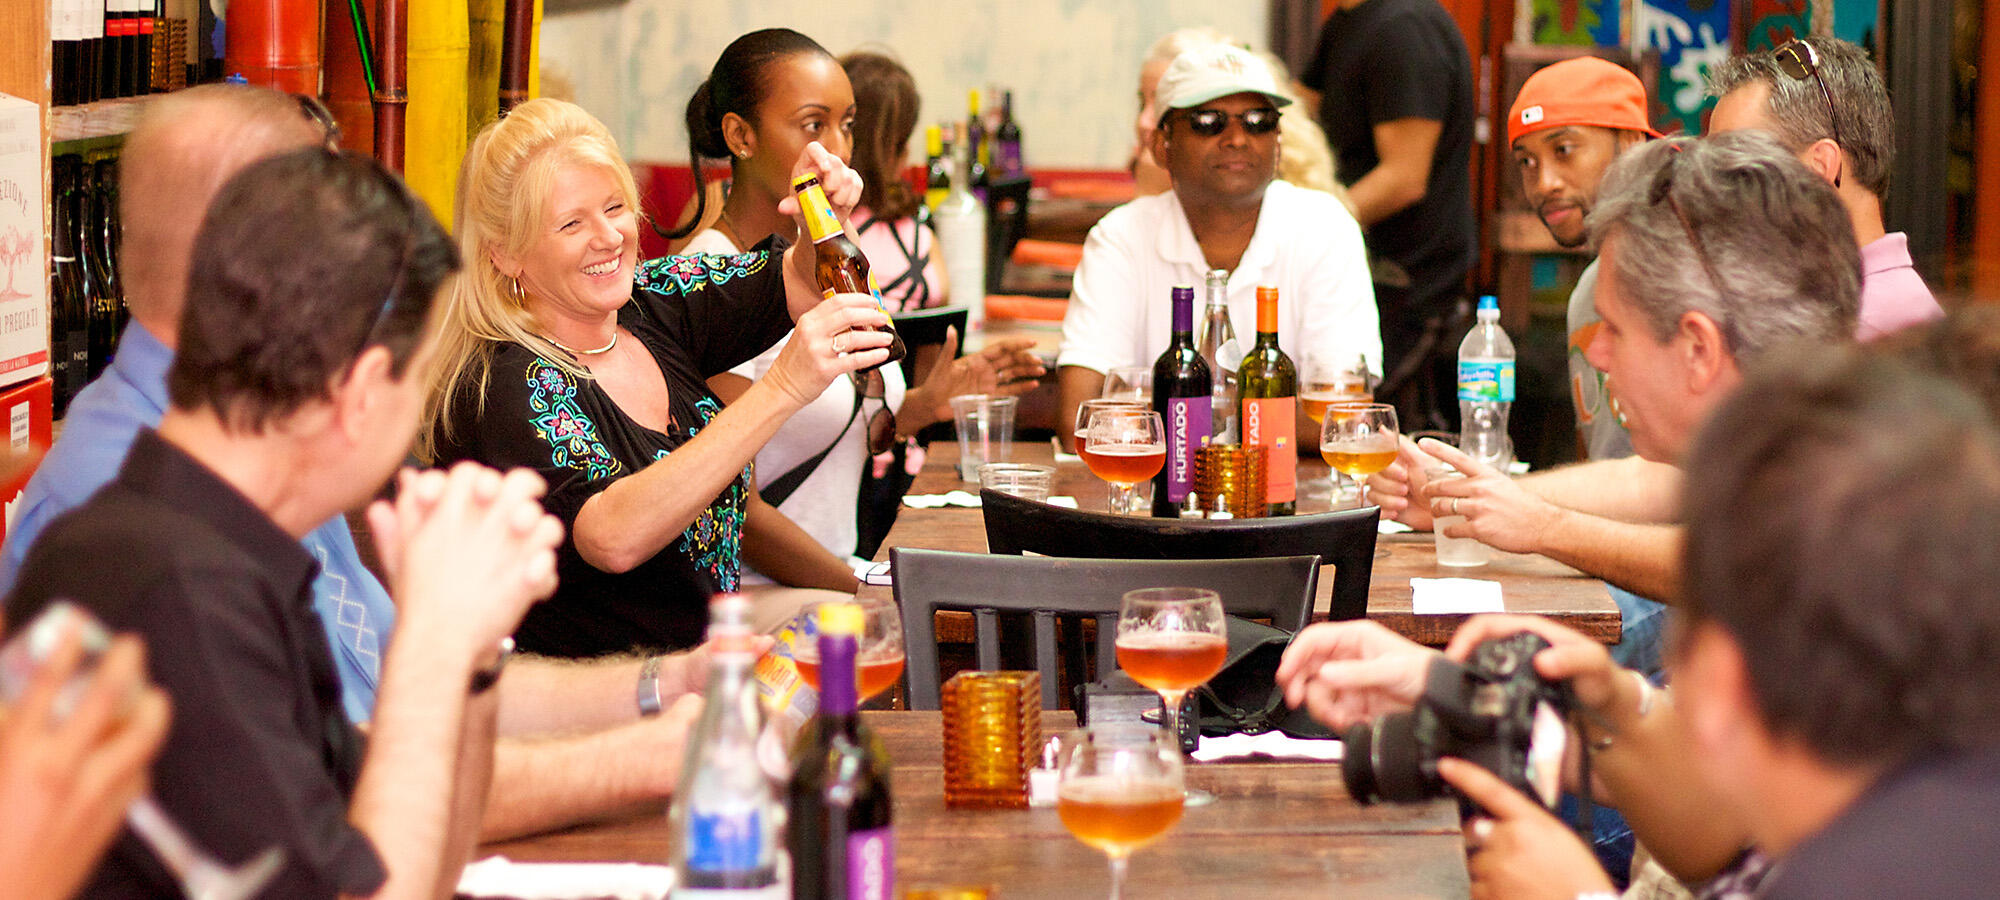 A culinary group enjoying wine at a table during a Miami Food Tour in Little Havana.